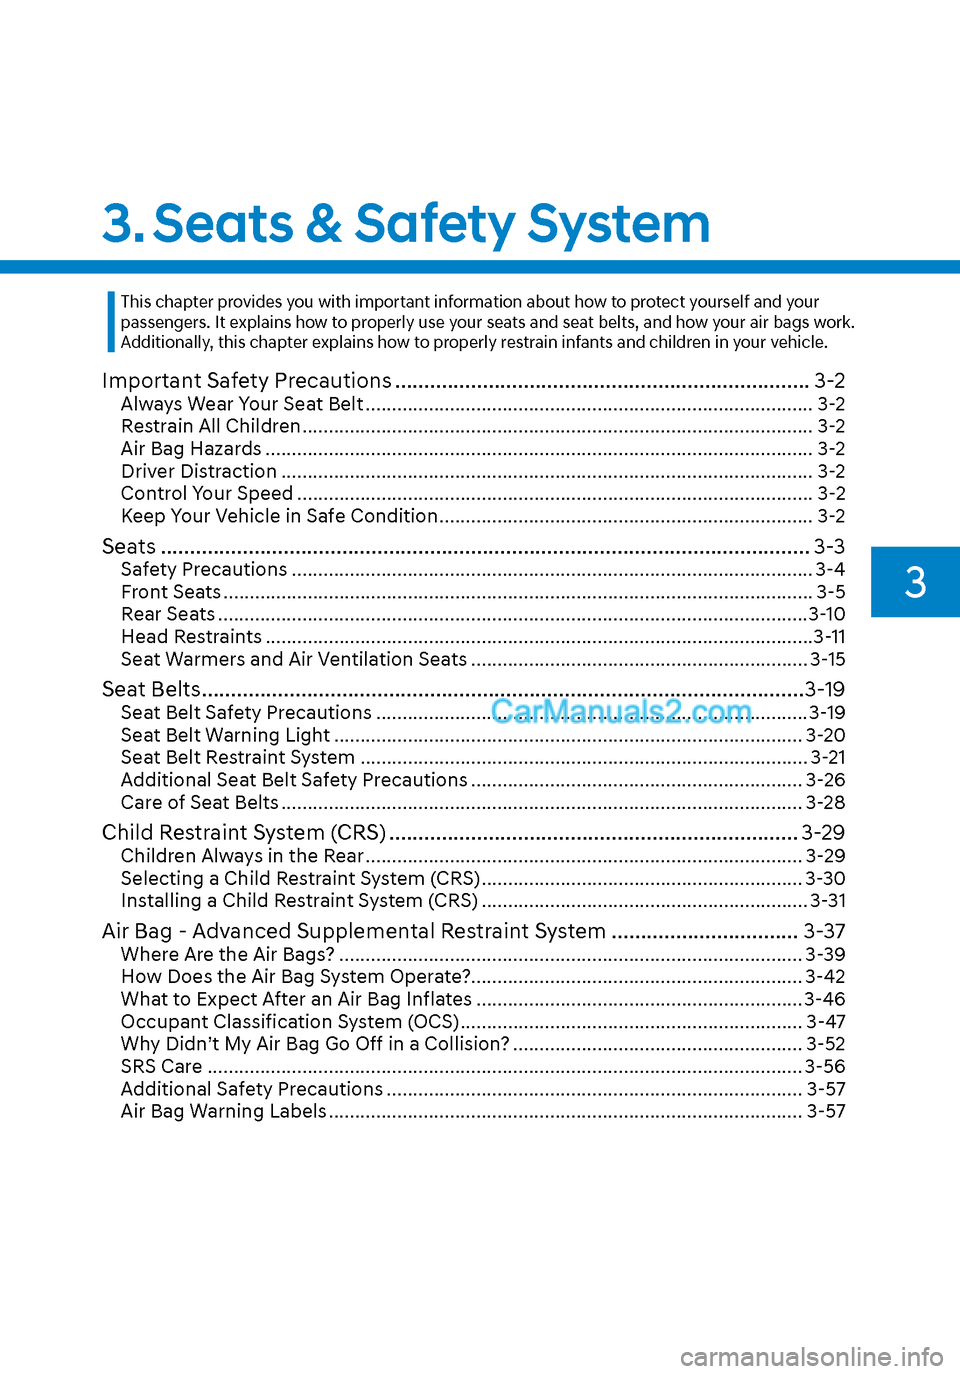 Hyundai Sonata 2020  Owners Manual 3. Seats & Safety System
3
Important Safety Precautions ....................................................................... 3-2
Always Wear Your Seat Belt .........................................